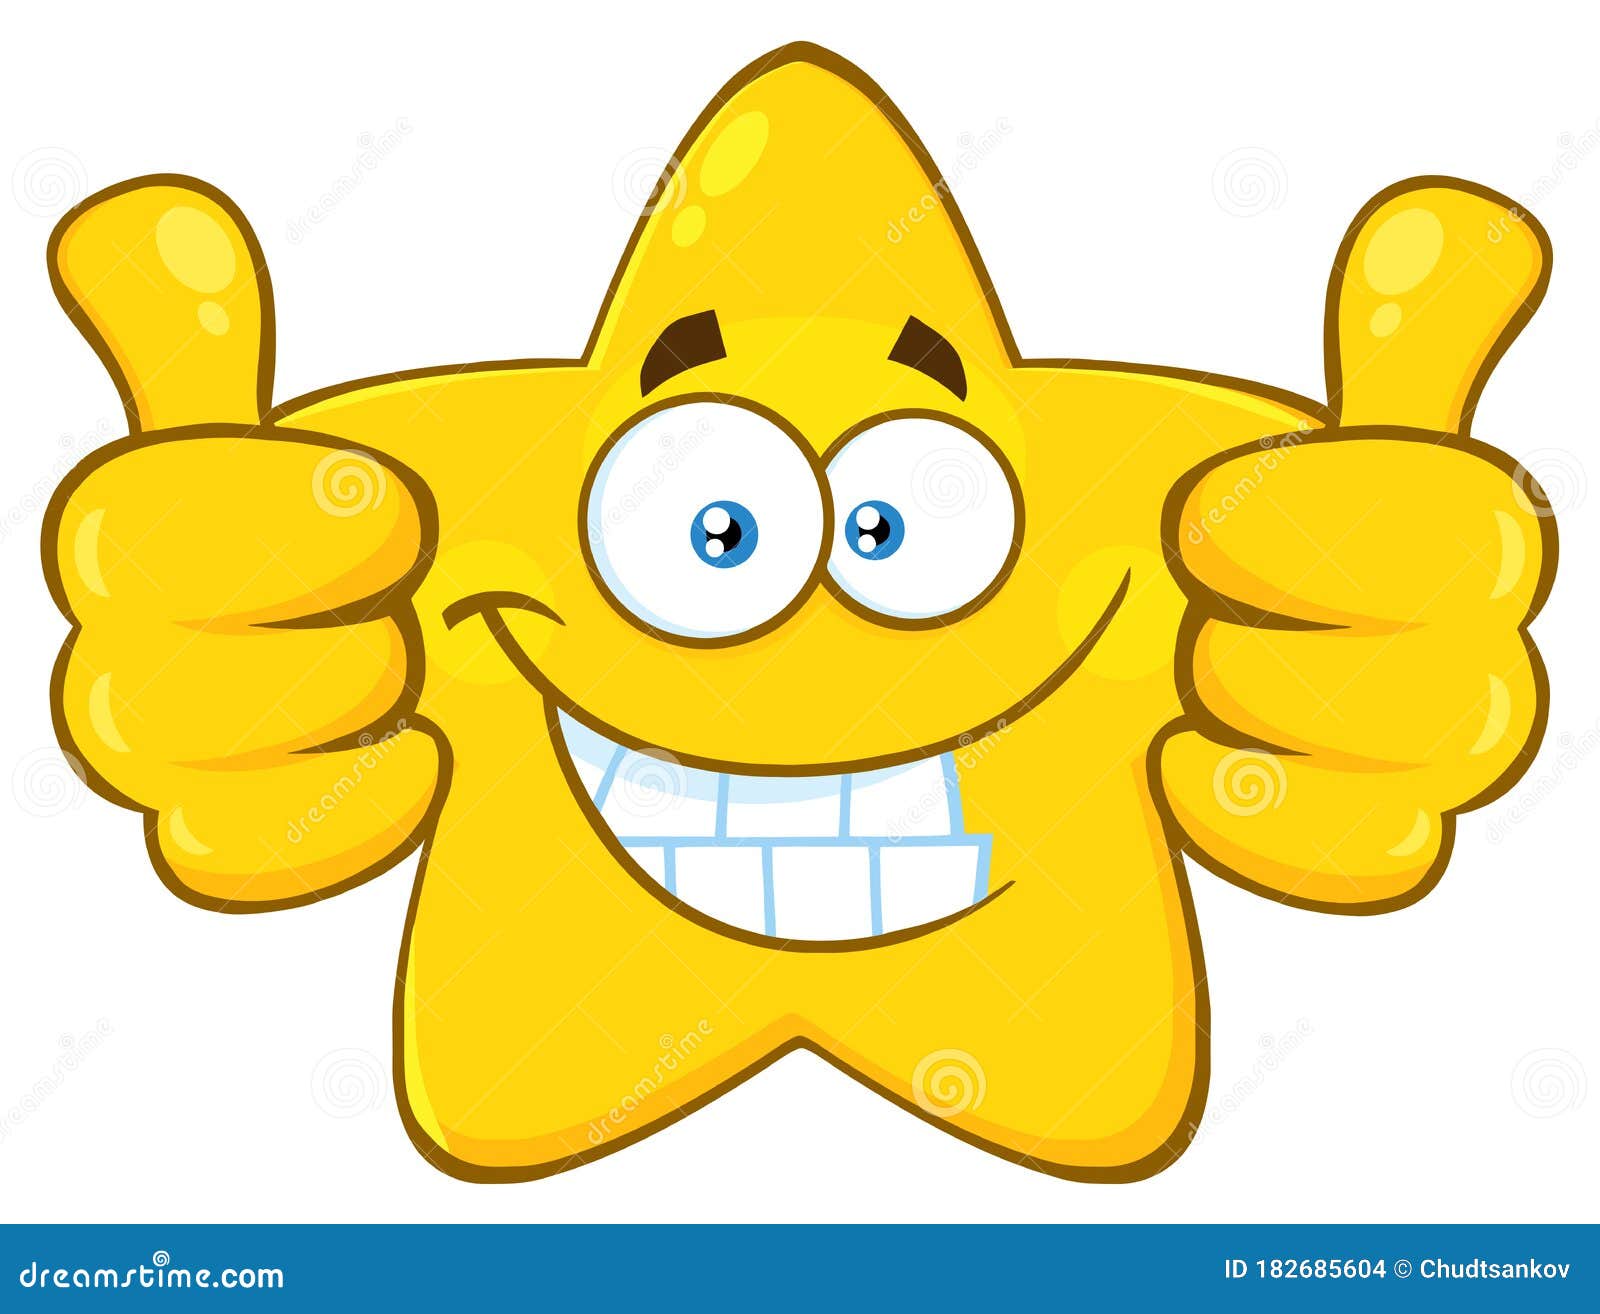 Smiling Yellow Star Cartoon Emoji Face Character With Wink Expression Giving A Thumb Up Royalty